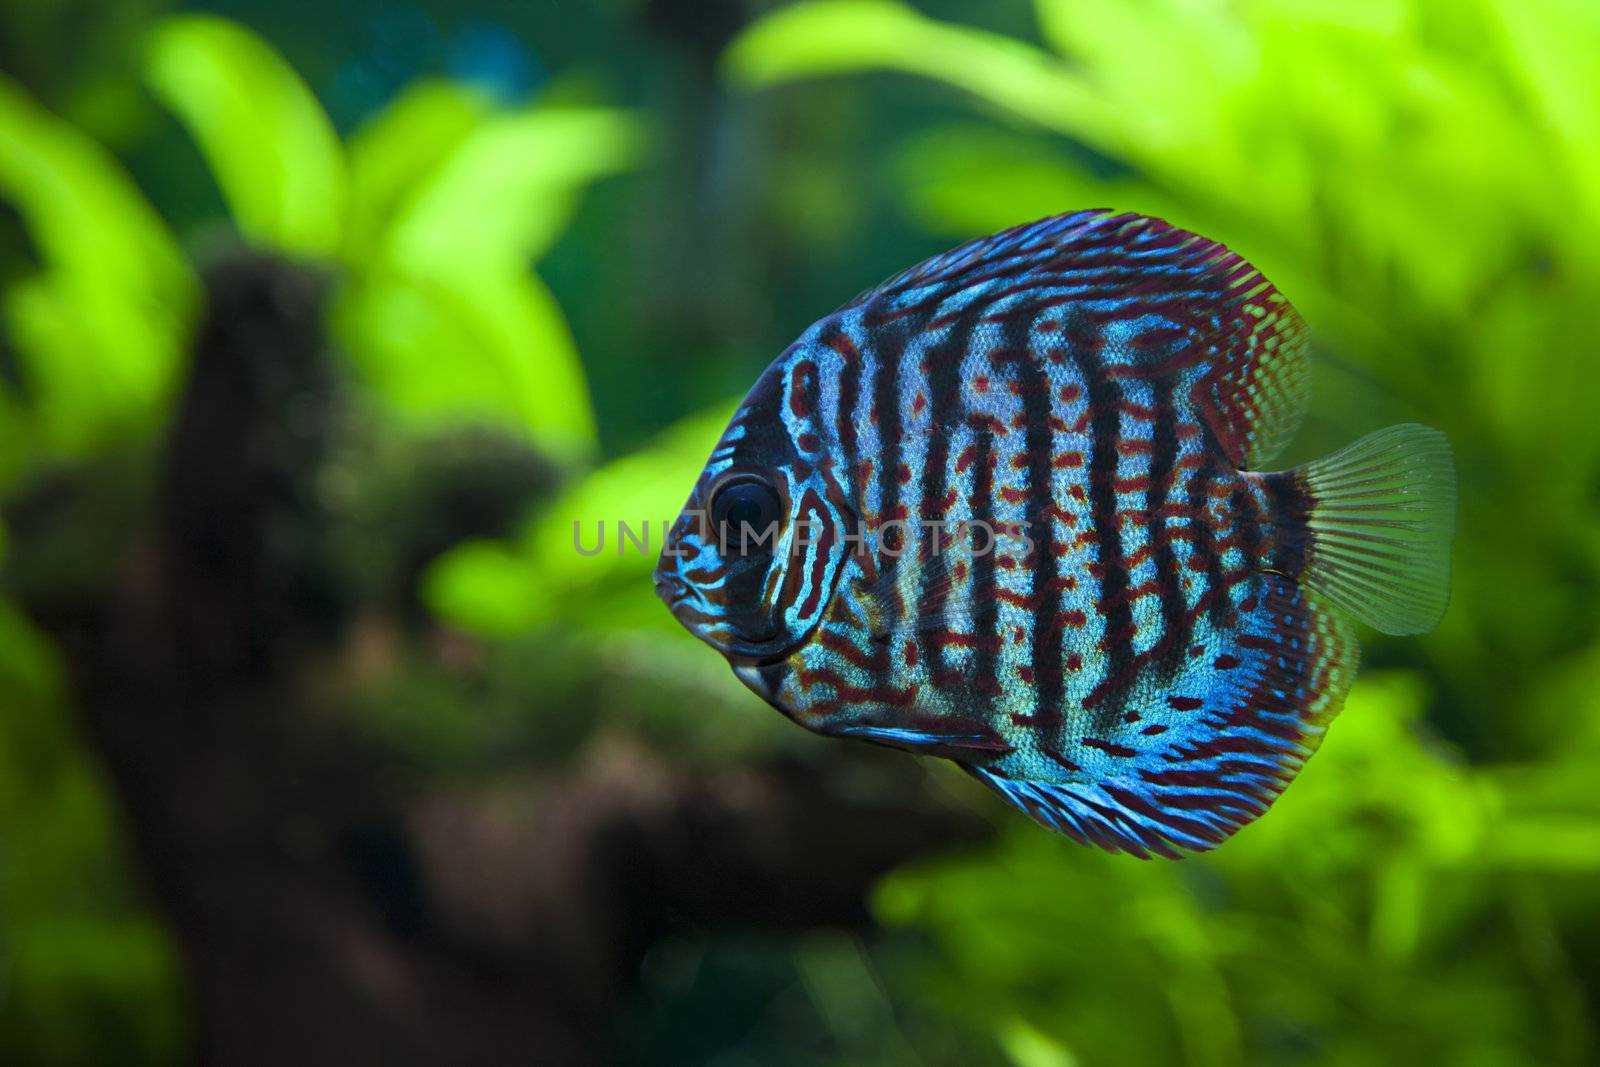 A colorful close up shot of a Discus Fish